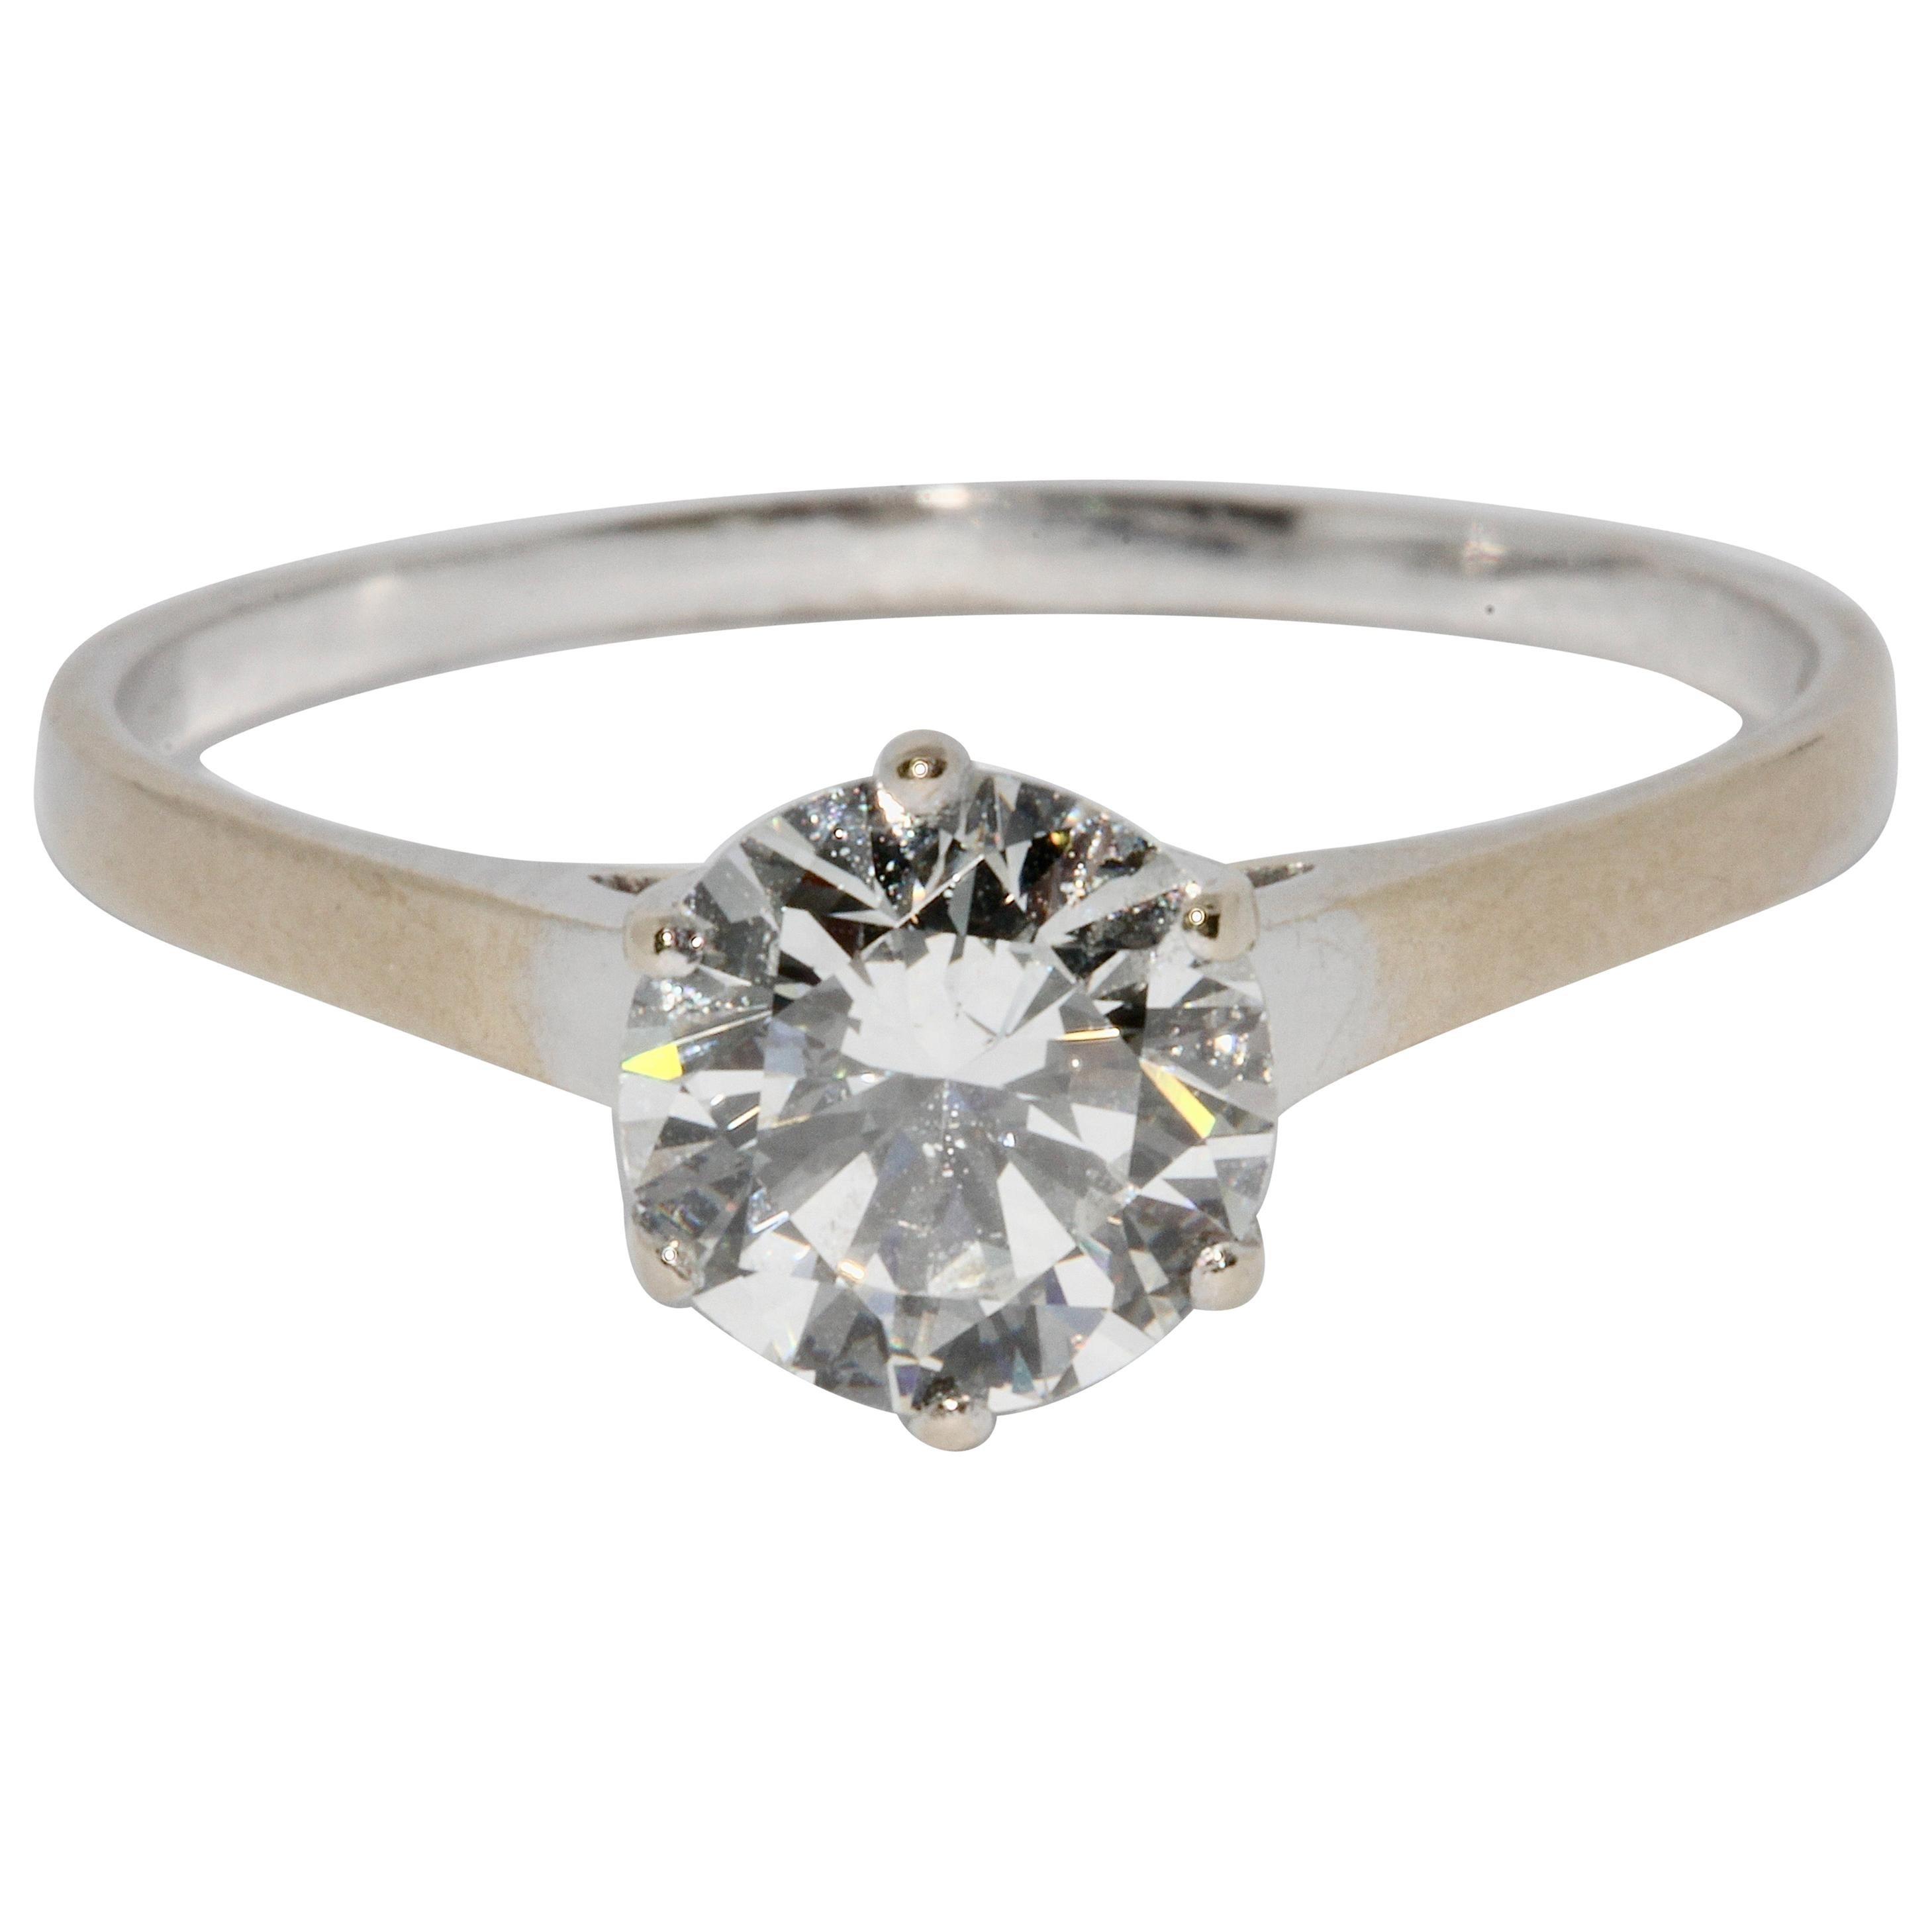 1.17 Carat Solitaire Diamond Engagement Ring, White Gold